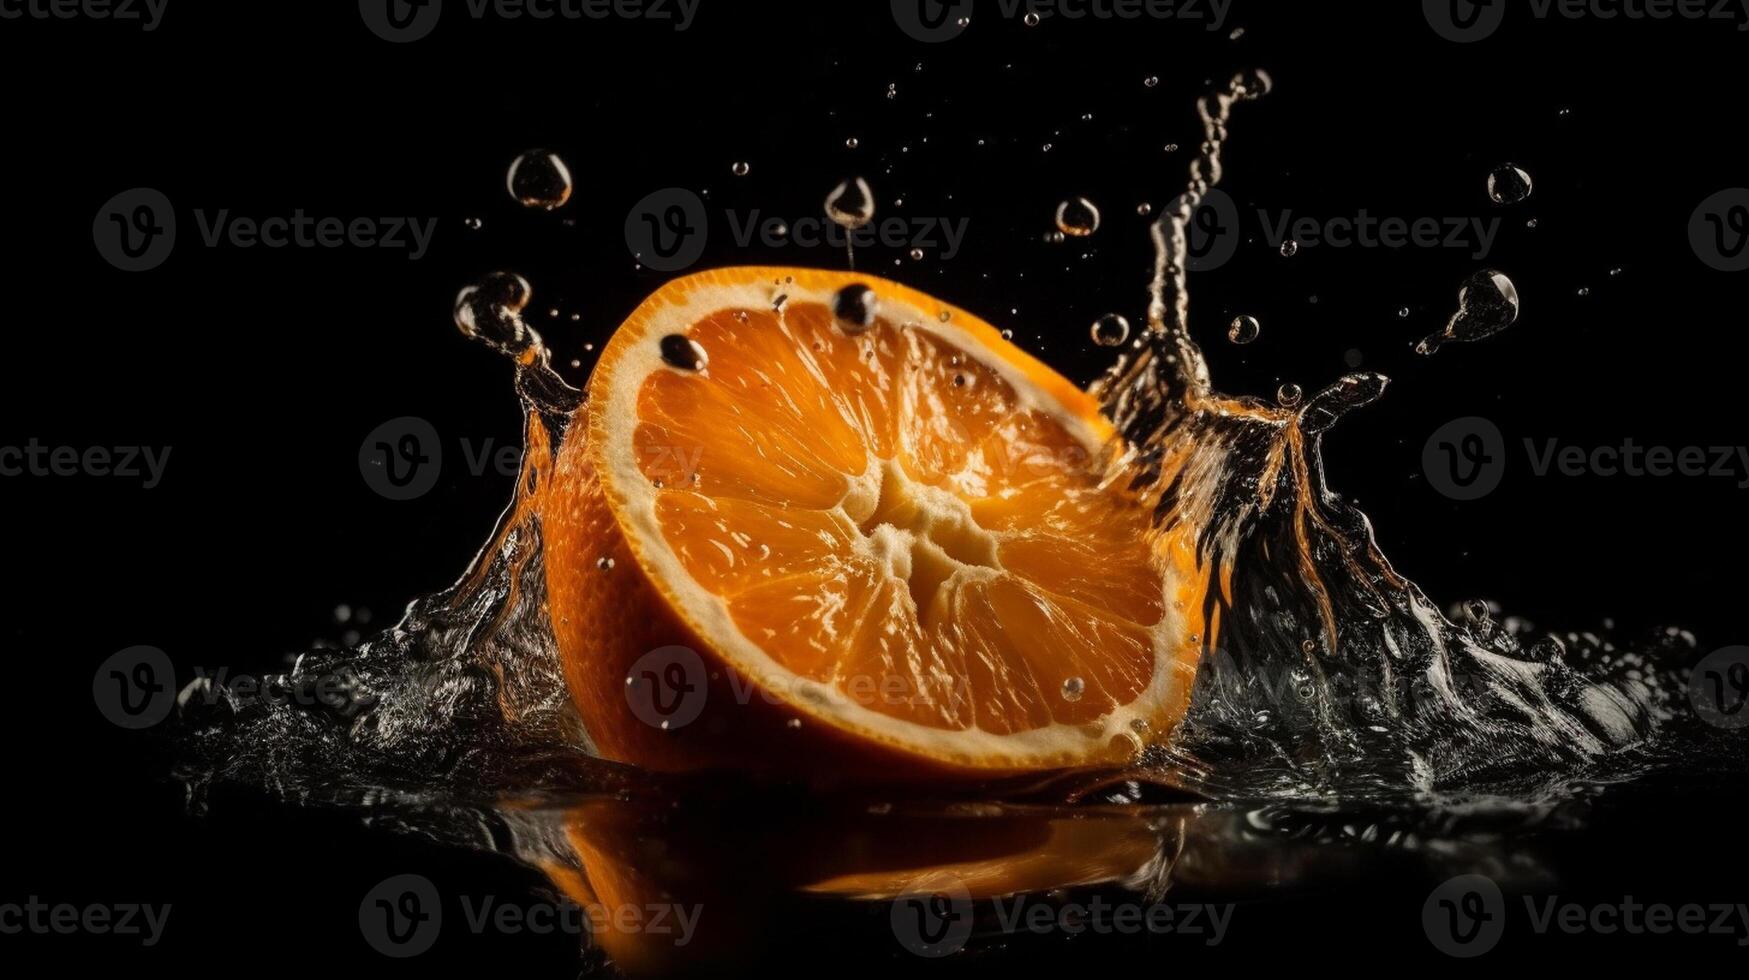 A slice of orange is being squeezed into a liquid splash photo